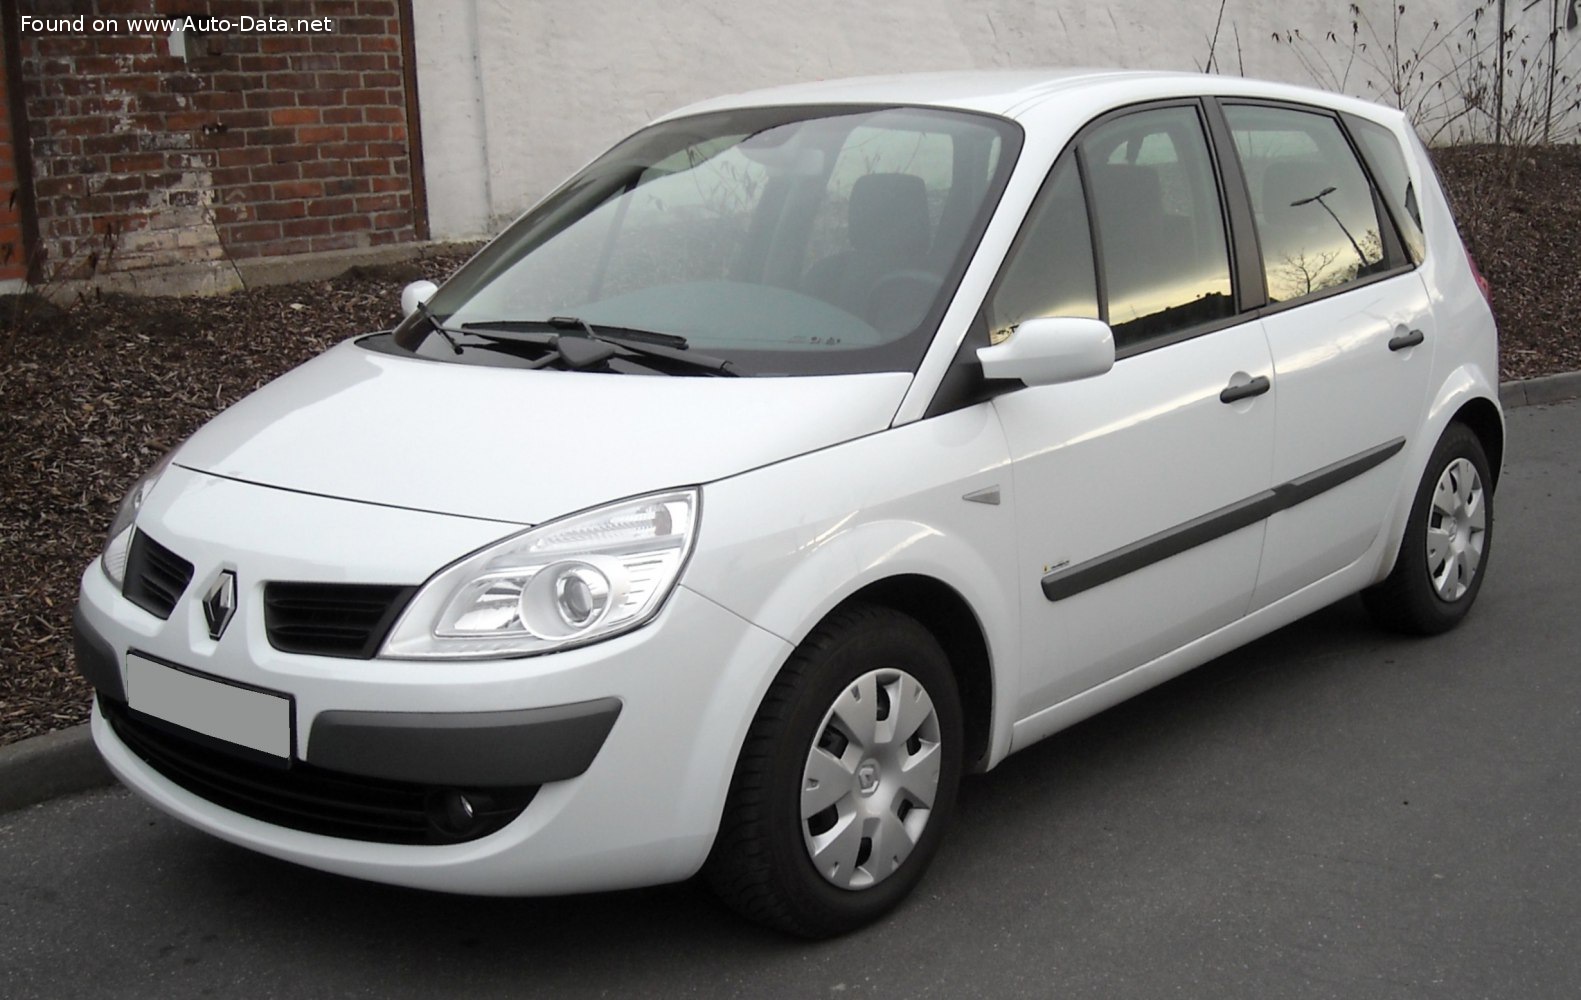 2006 Renault Scenic II (Phase II) 1.6 i 16V (112 Hp)  Technical specs,  data, fuel consumption, Dimensions